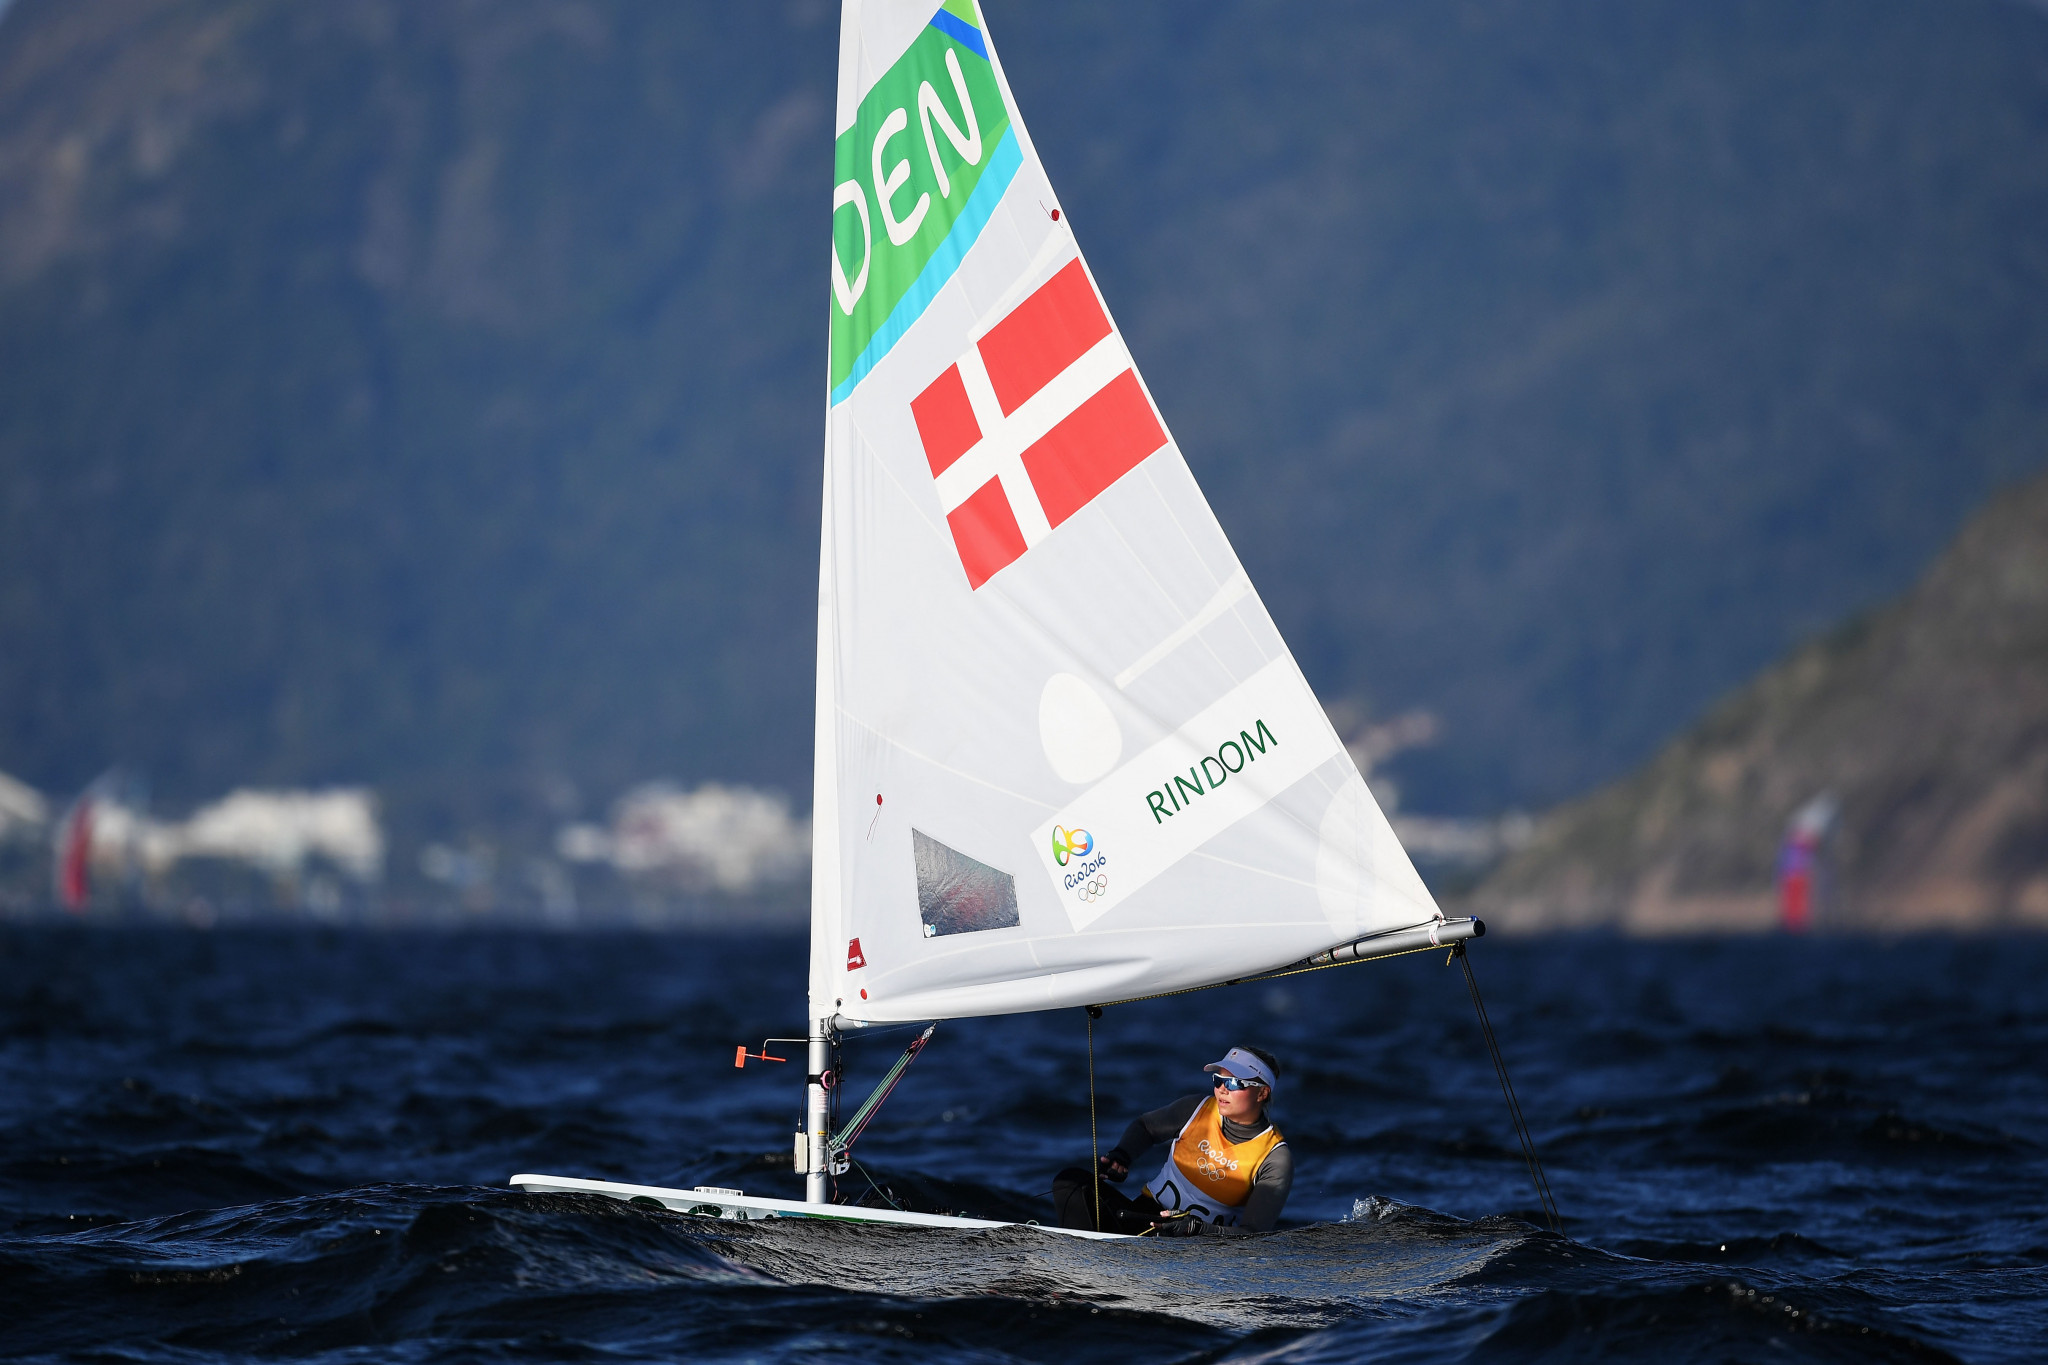 Rindom and Chiavarini to defend crowns at Laser European Championships